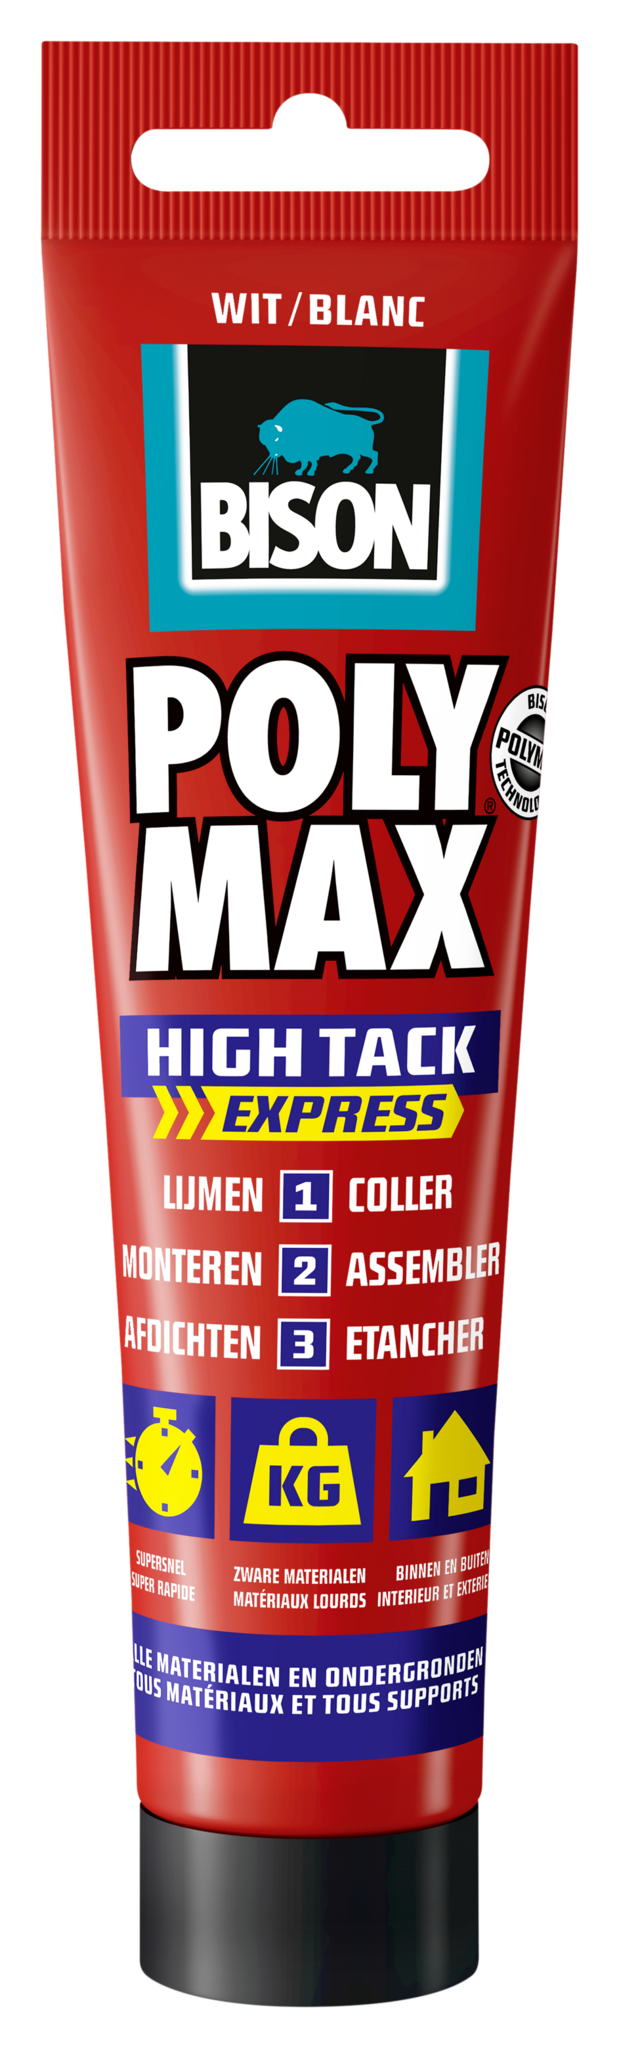 https://www.warentuin.nl/media/catalog/product/S/C/SCAN8710439263670_bison_poly_max_high_tack_express_poly_max_high_tack_express_w_3bc5.png